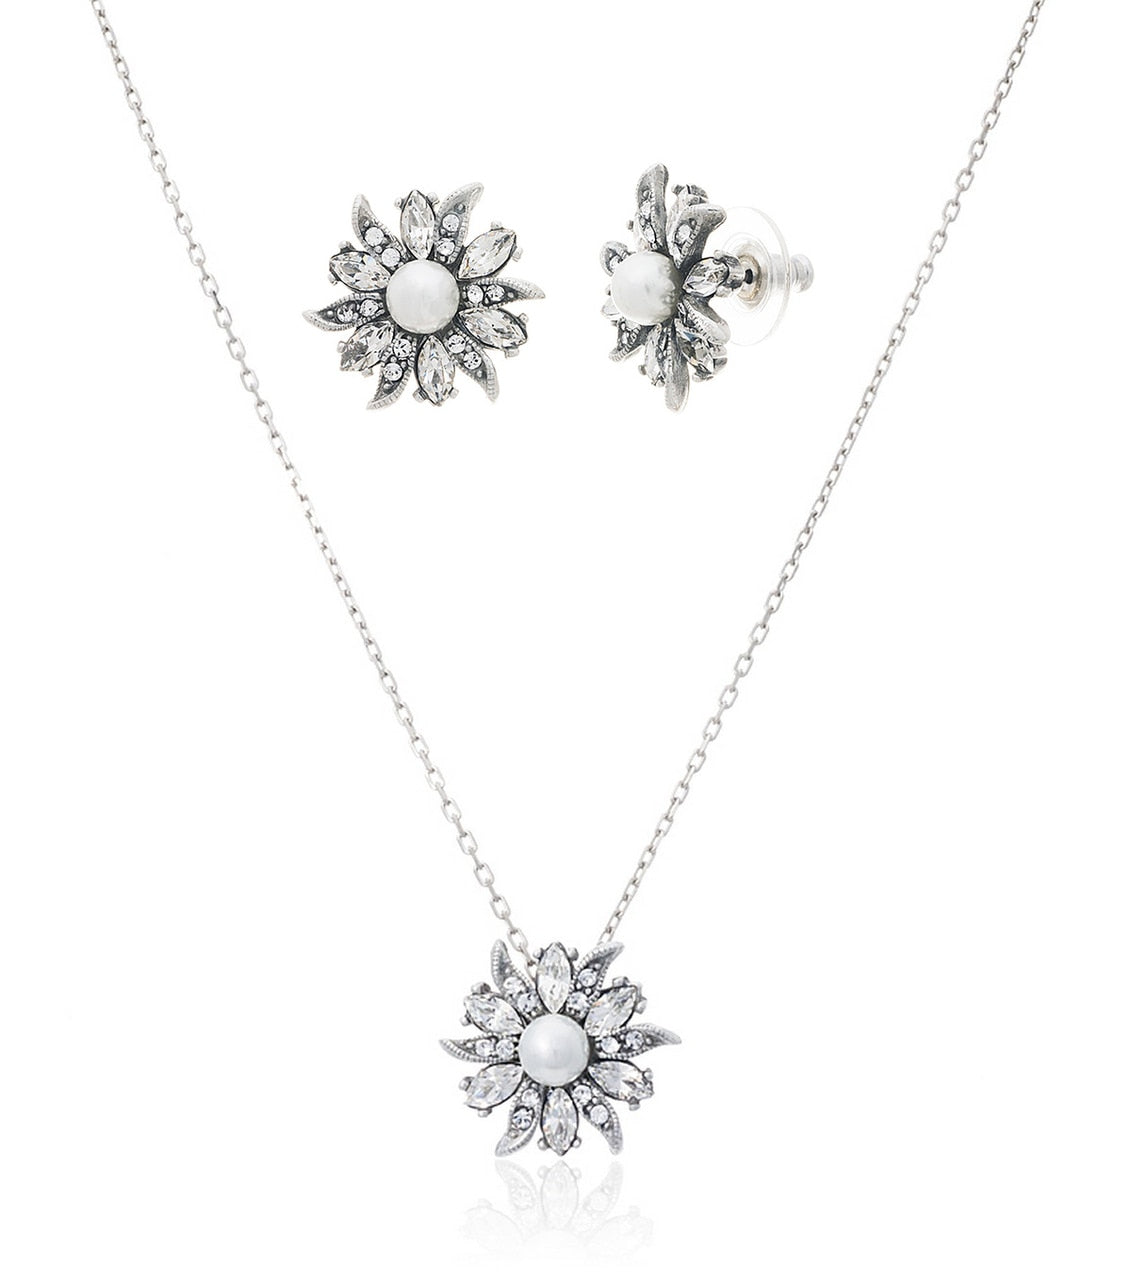 Floral and Lace Earrings and Pendant Set - Thomas Laine Jewelry